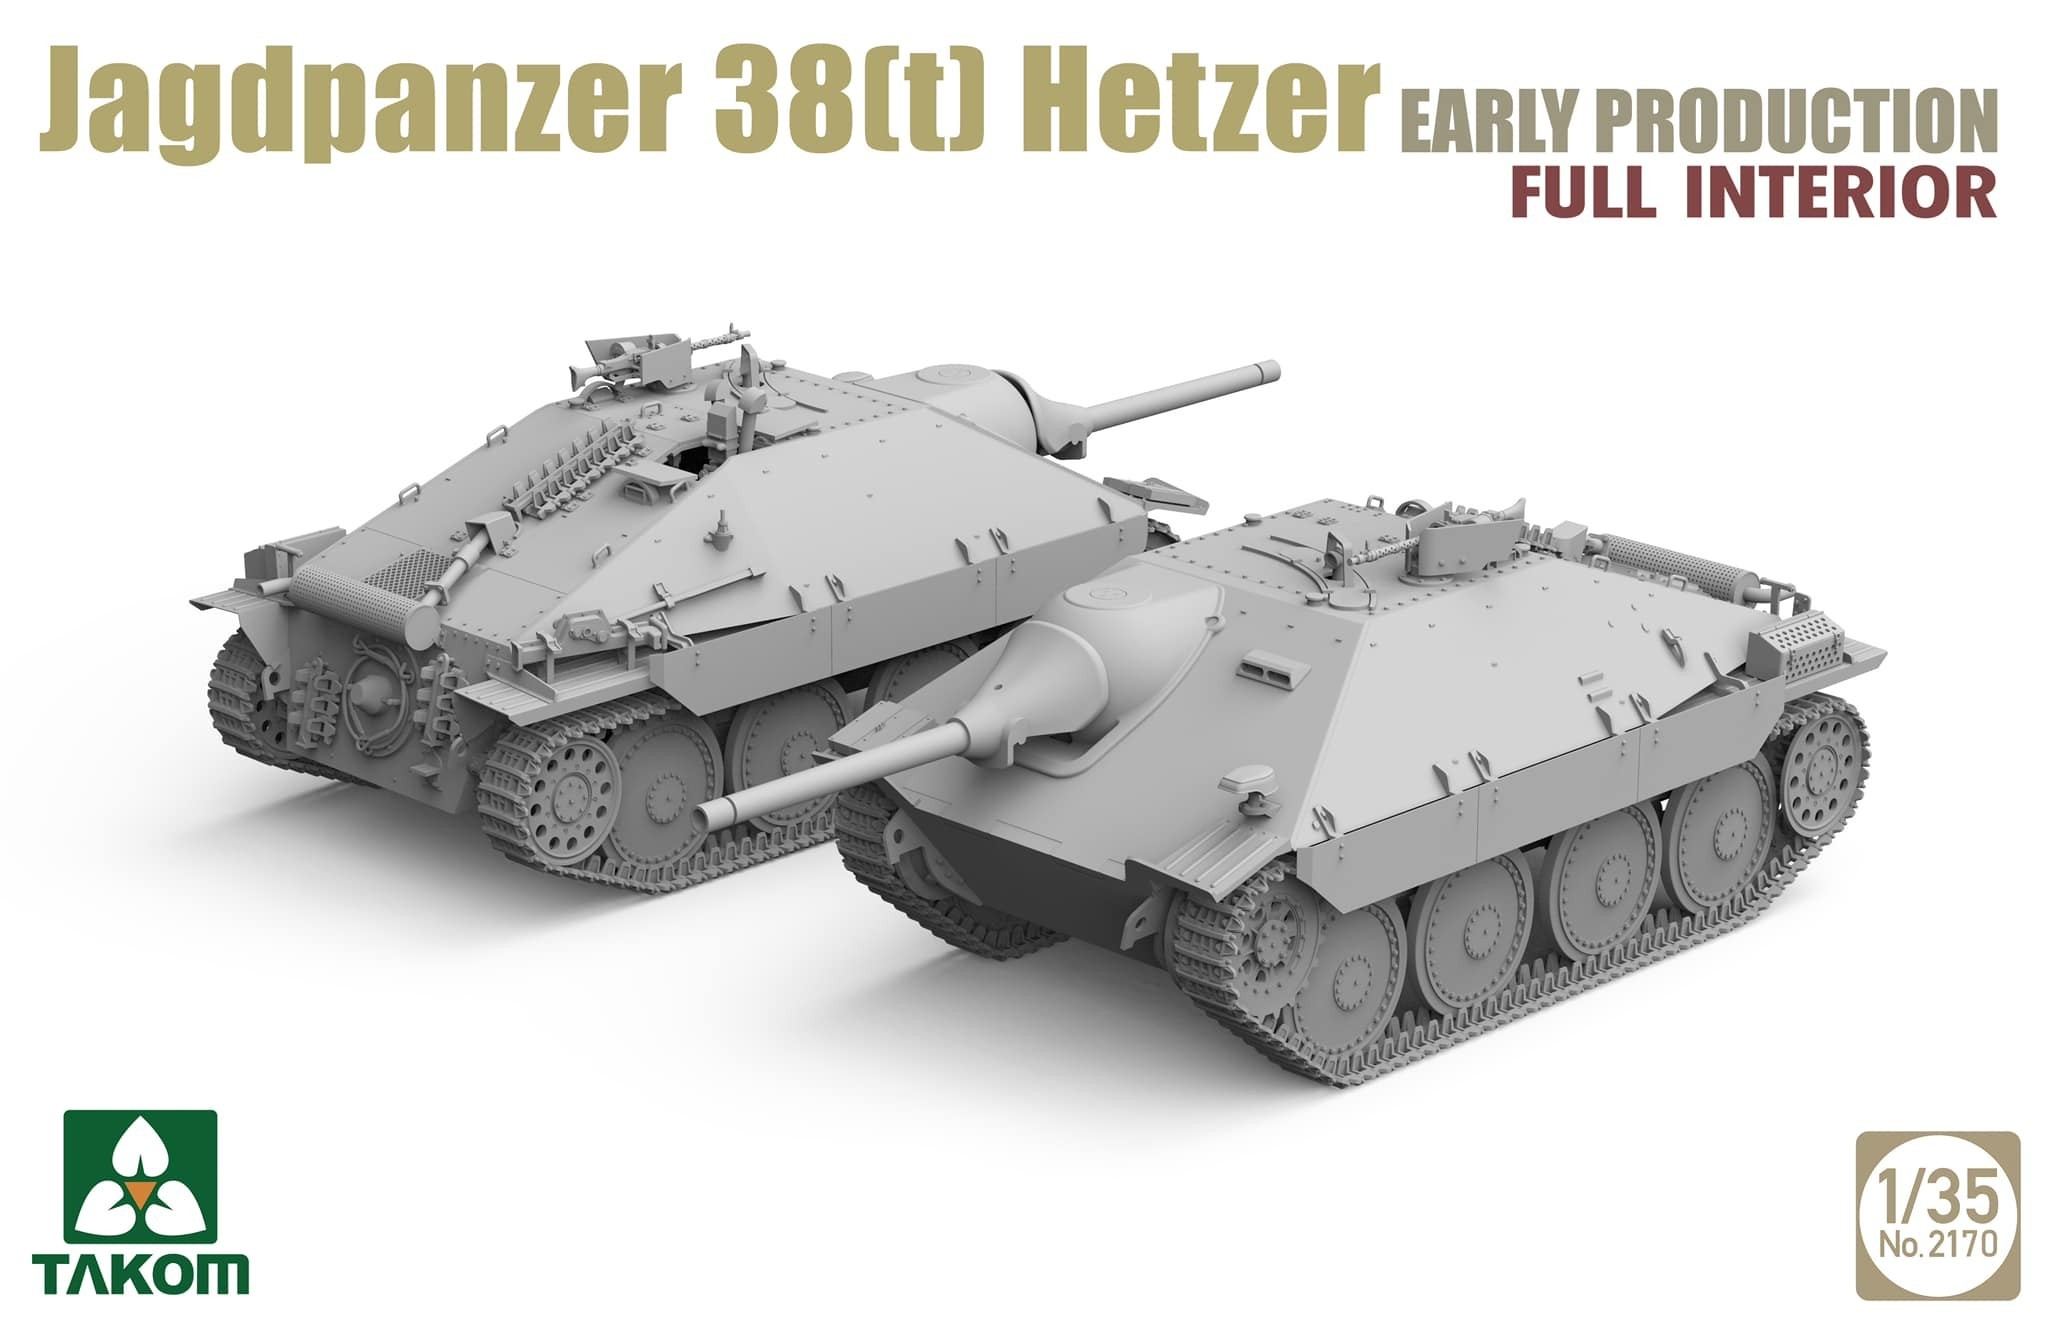 2170 - Jagdpanzer 38(t) Hetzer, Early Production